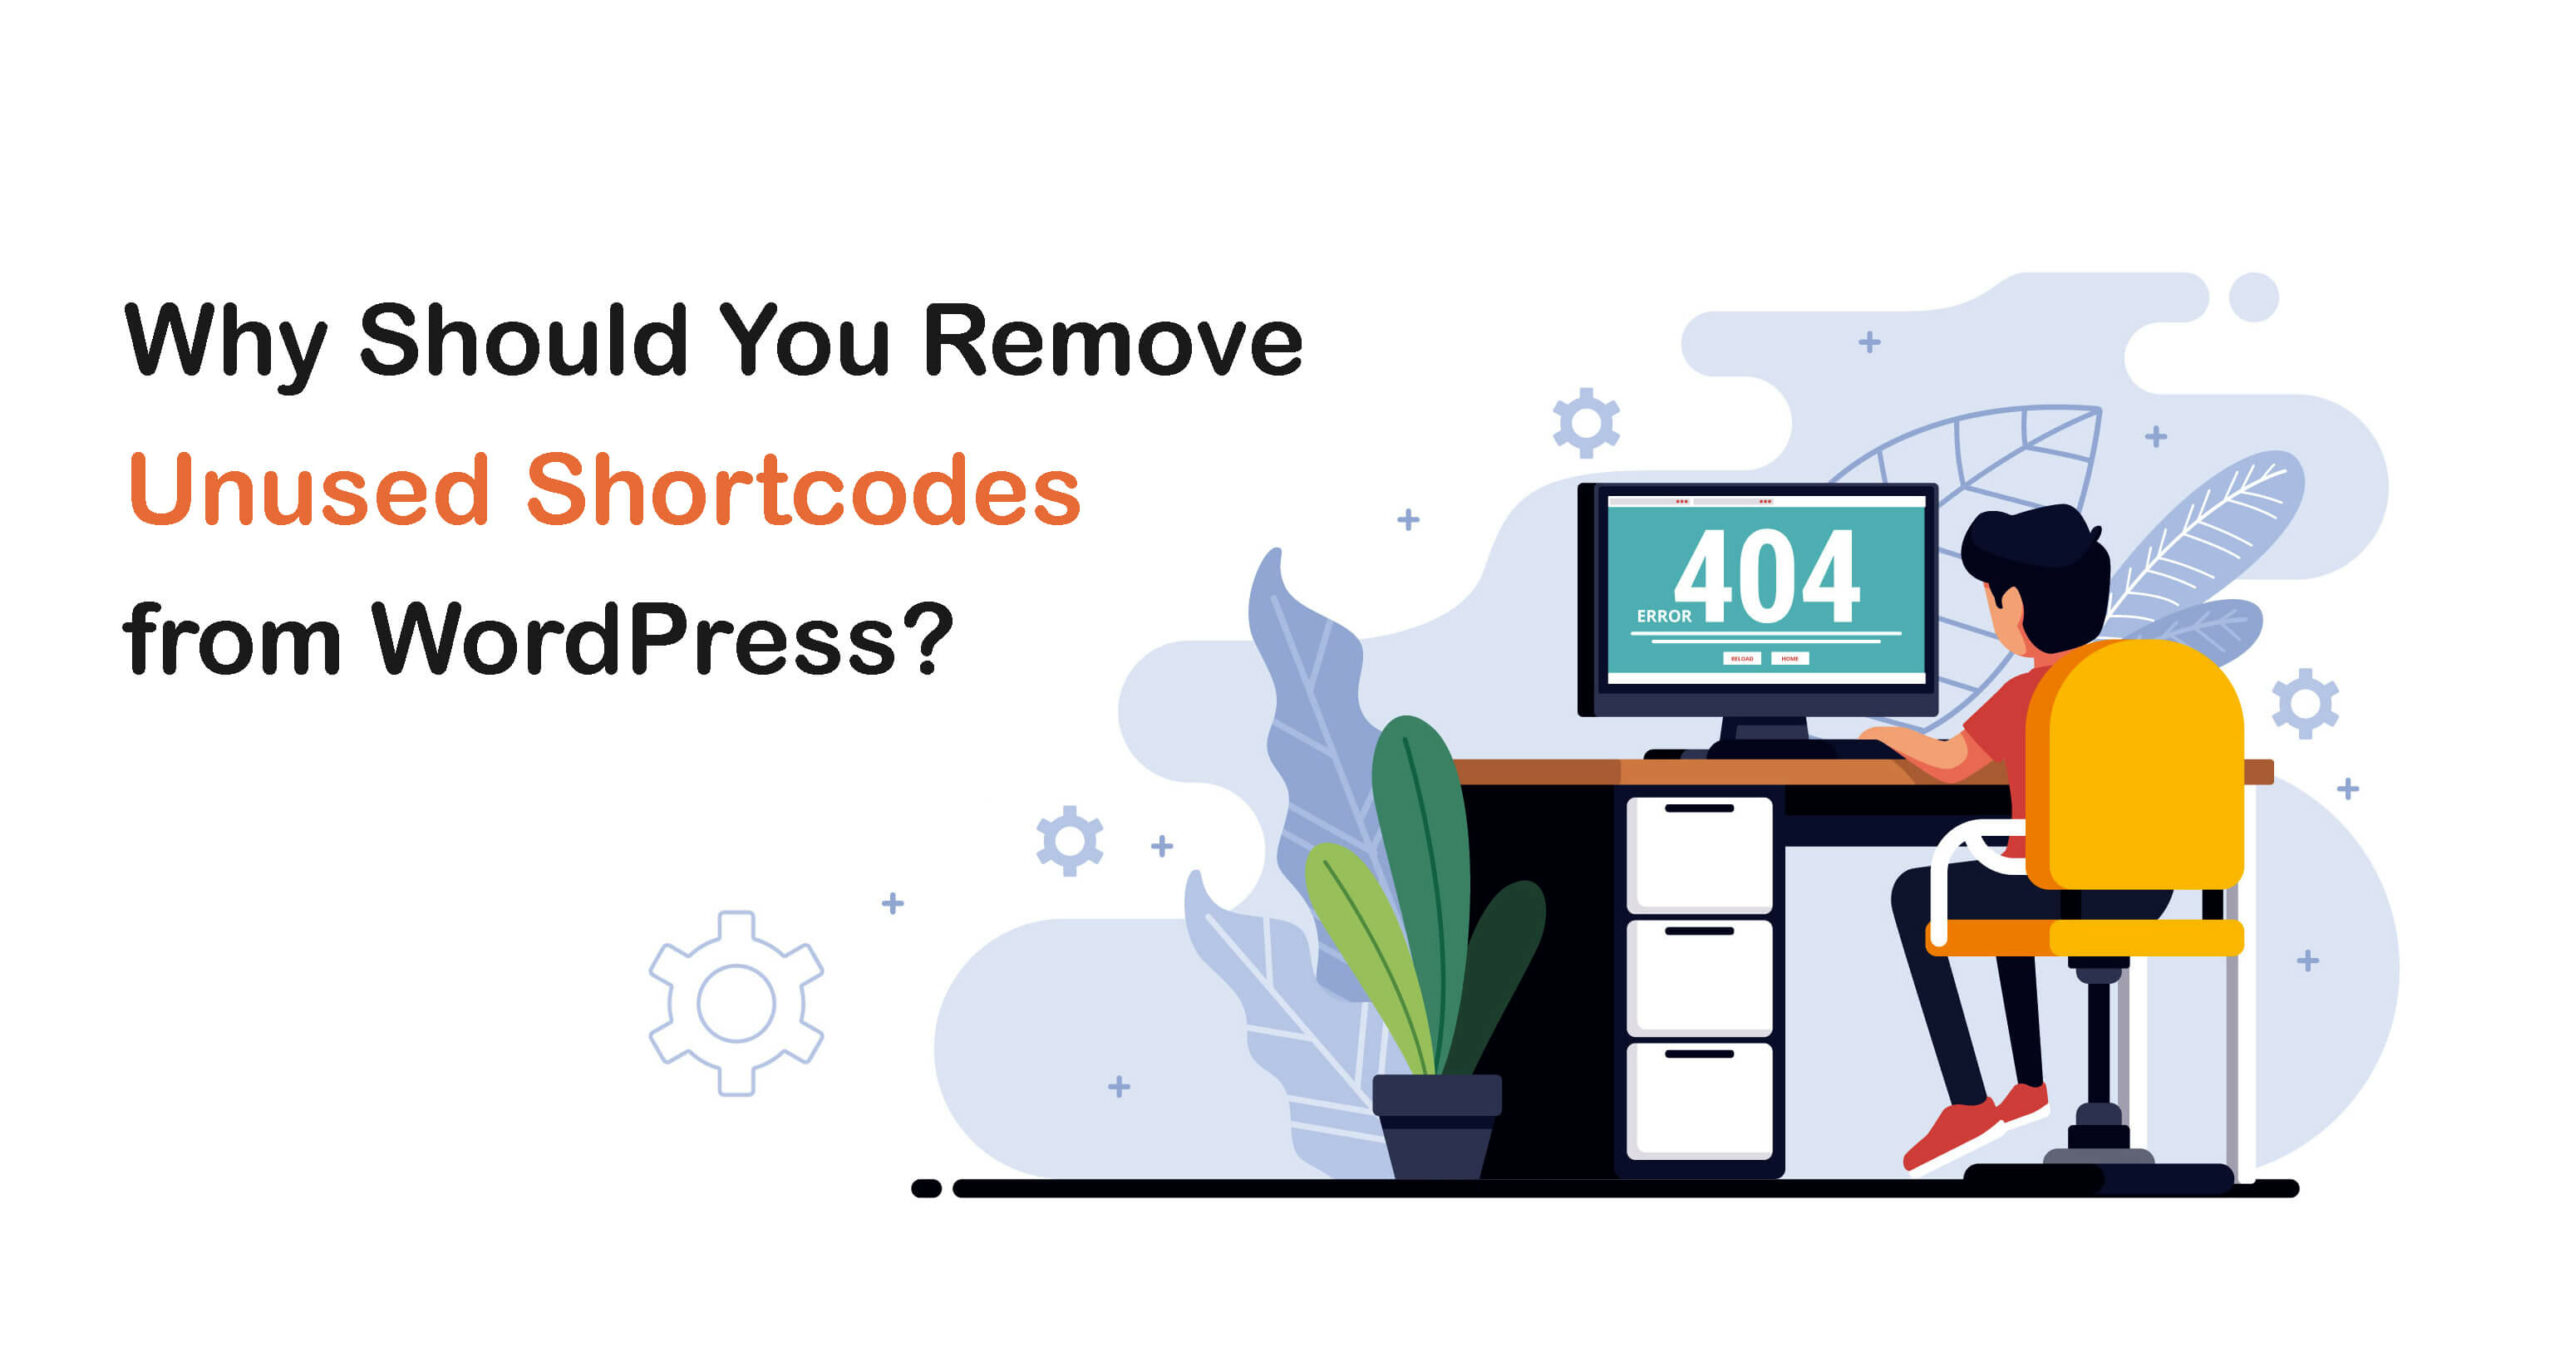 Why should you remove unused shortcodes from WordPress